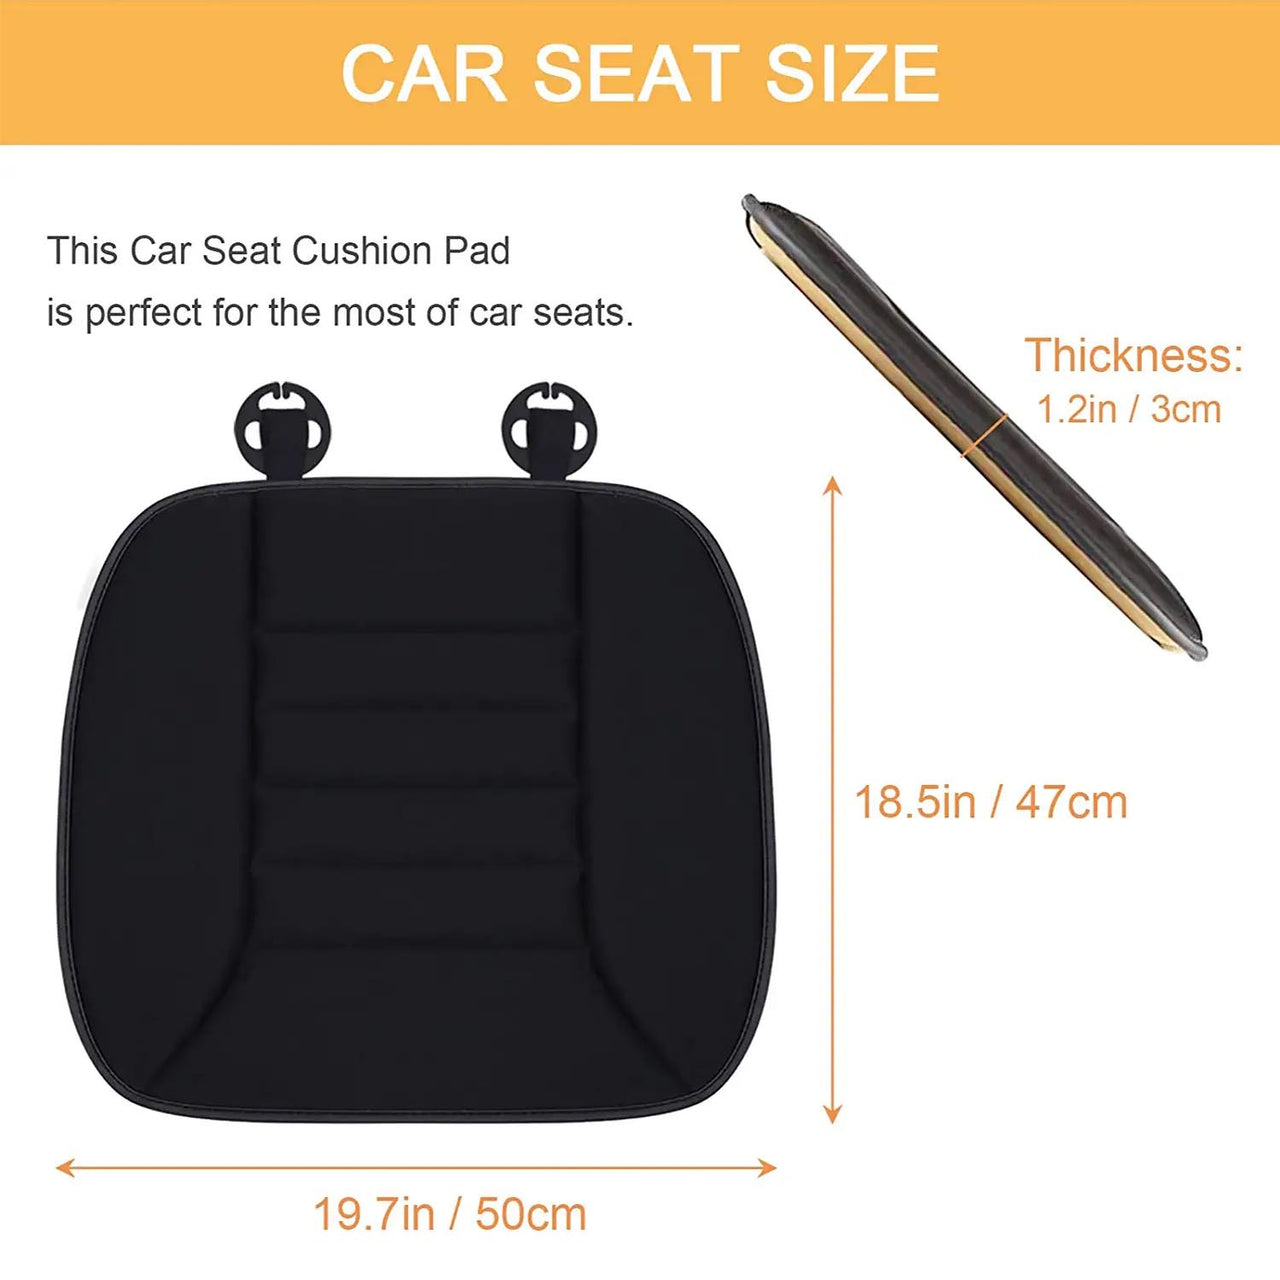 Car Seat Cushion with 1.2inch Comfort Memory Foam, Custom Logo For Your Cars, Seat Cushion for Car and Office Chair MC19989